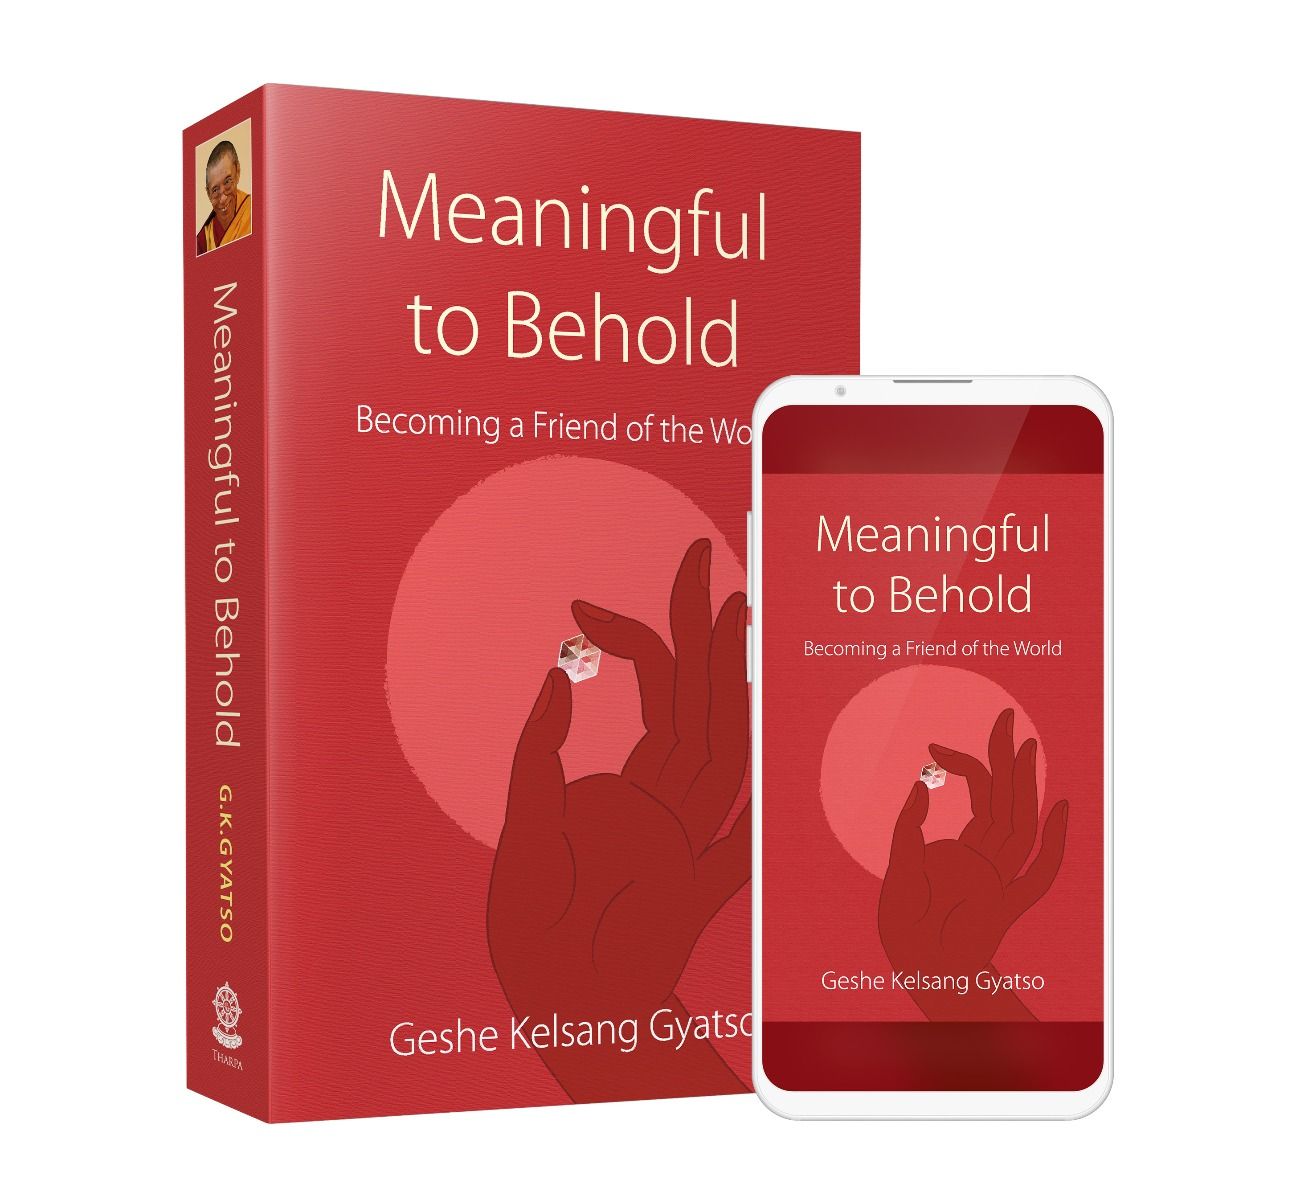 meaningful-to-behold_3d-paperback-front_and_ebook-phone-android-cover_combo_2019-02